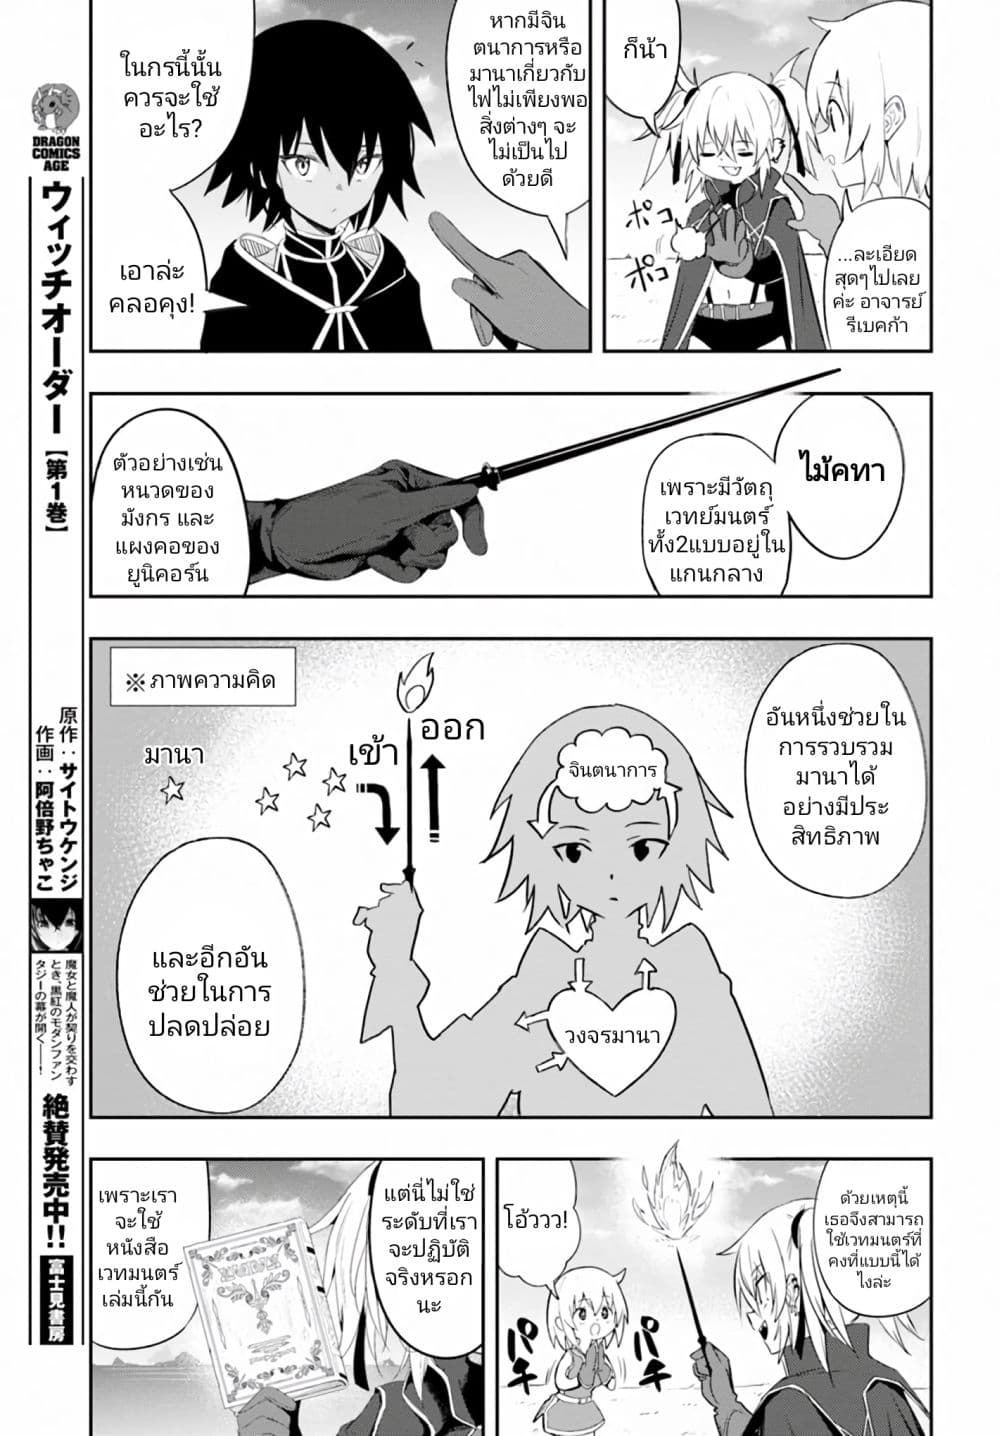 Witch Guild Fantasia 6 (19)